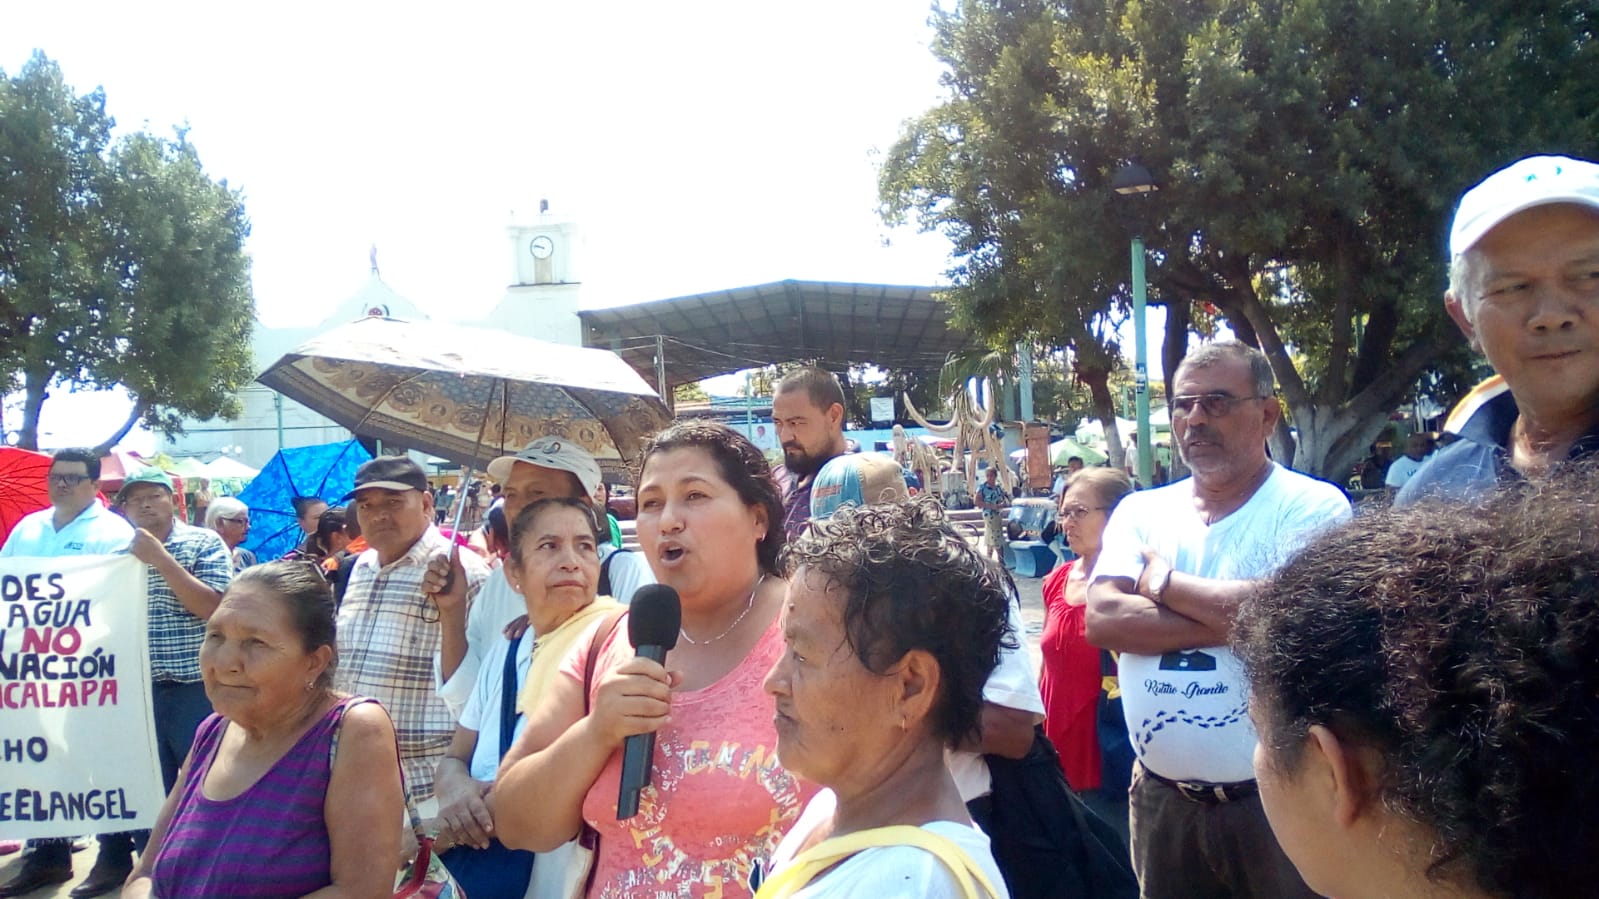 Mujeres Ambientalistas participates in a protest to protect water from industry in Valle el Angel